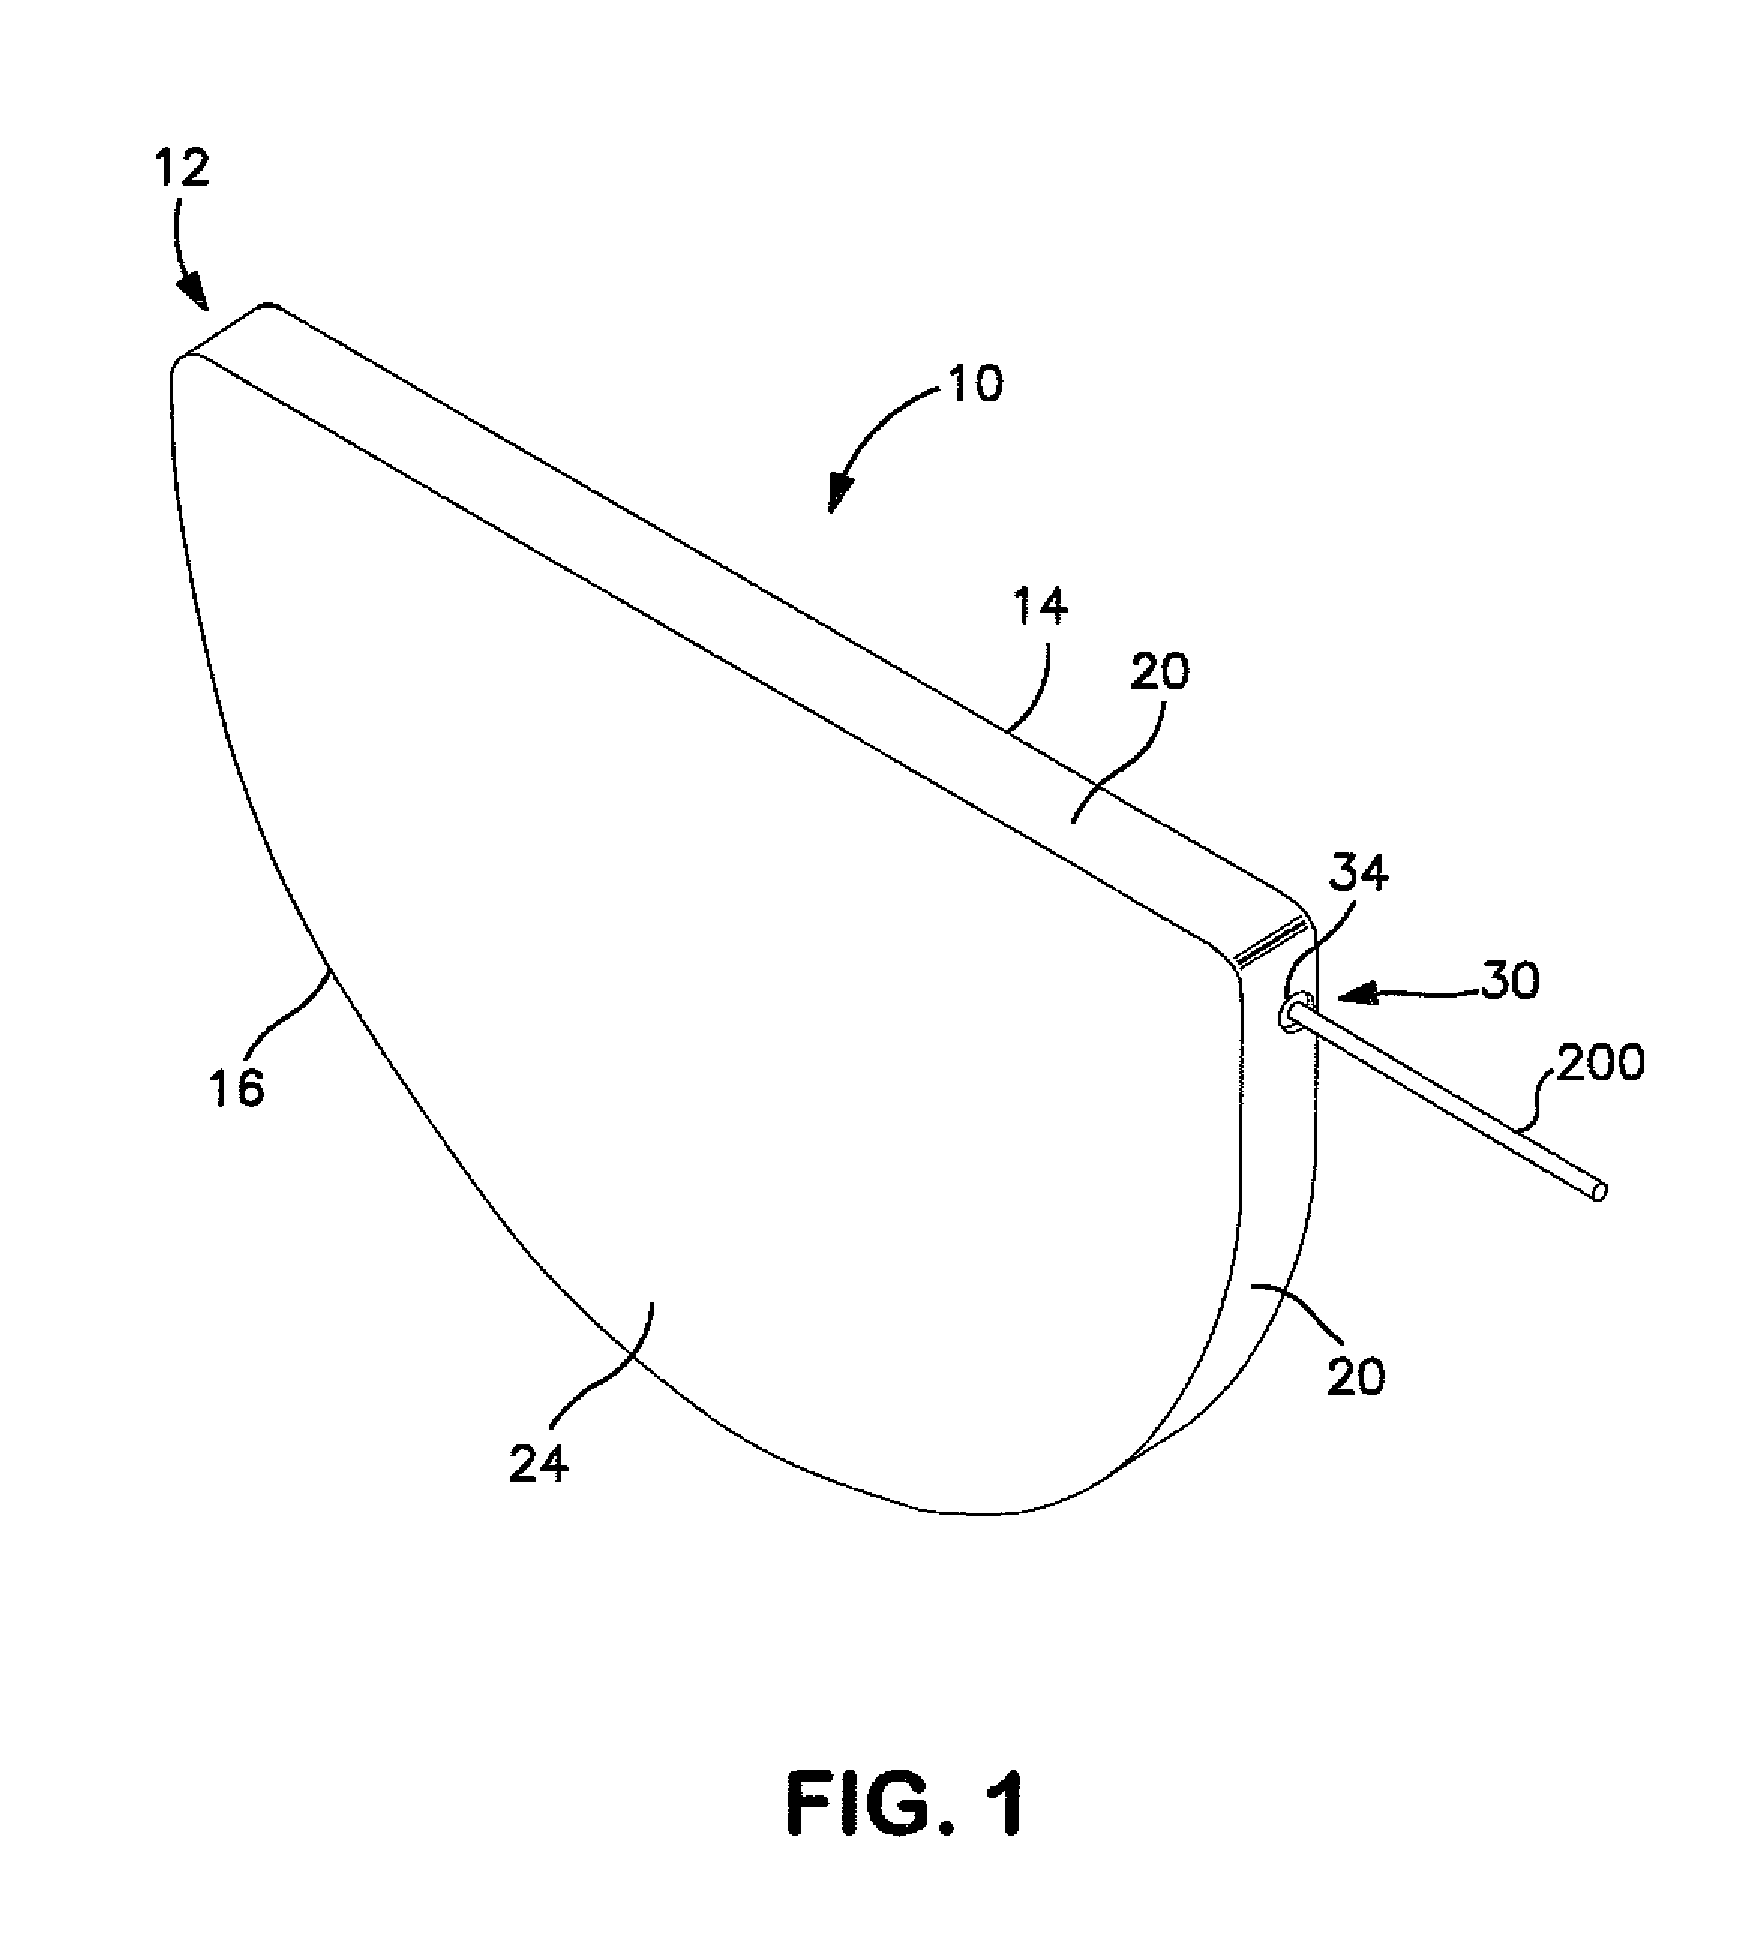 Wet electrolytic capacitor containing a gelled working electrolyte